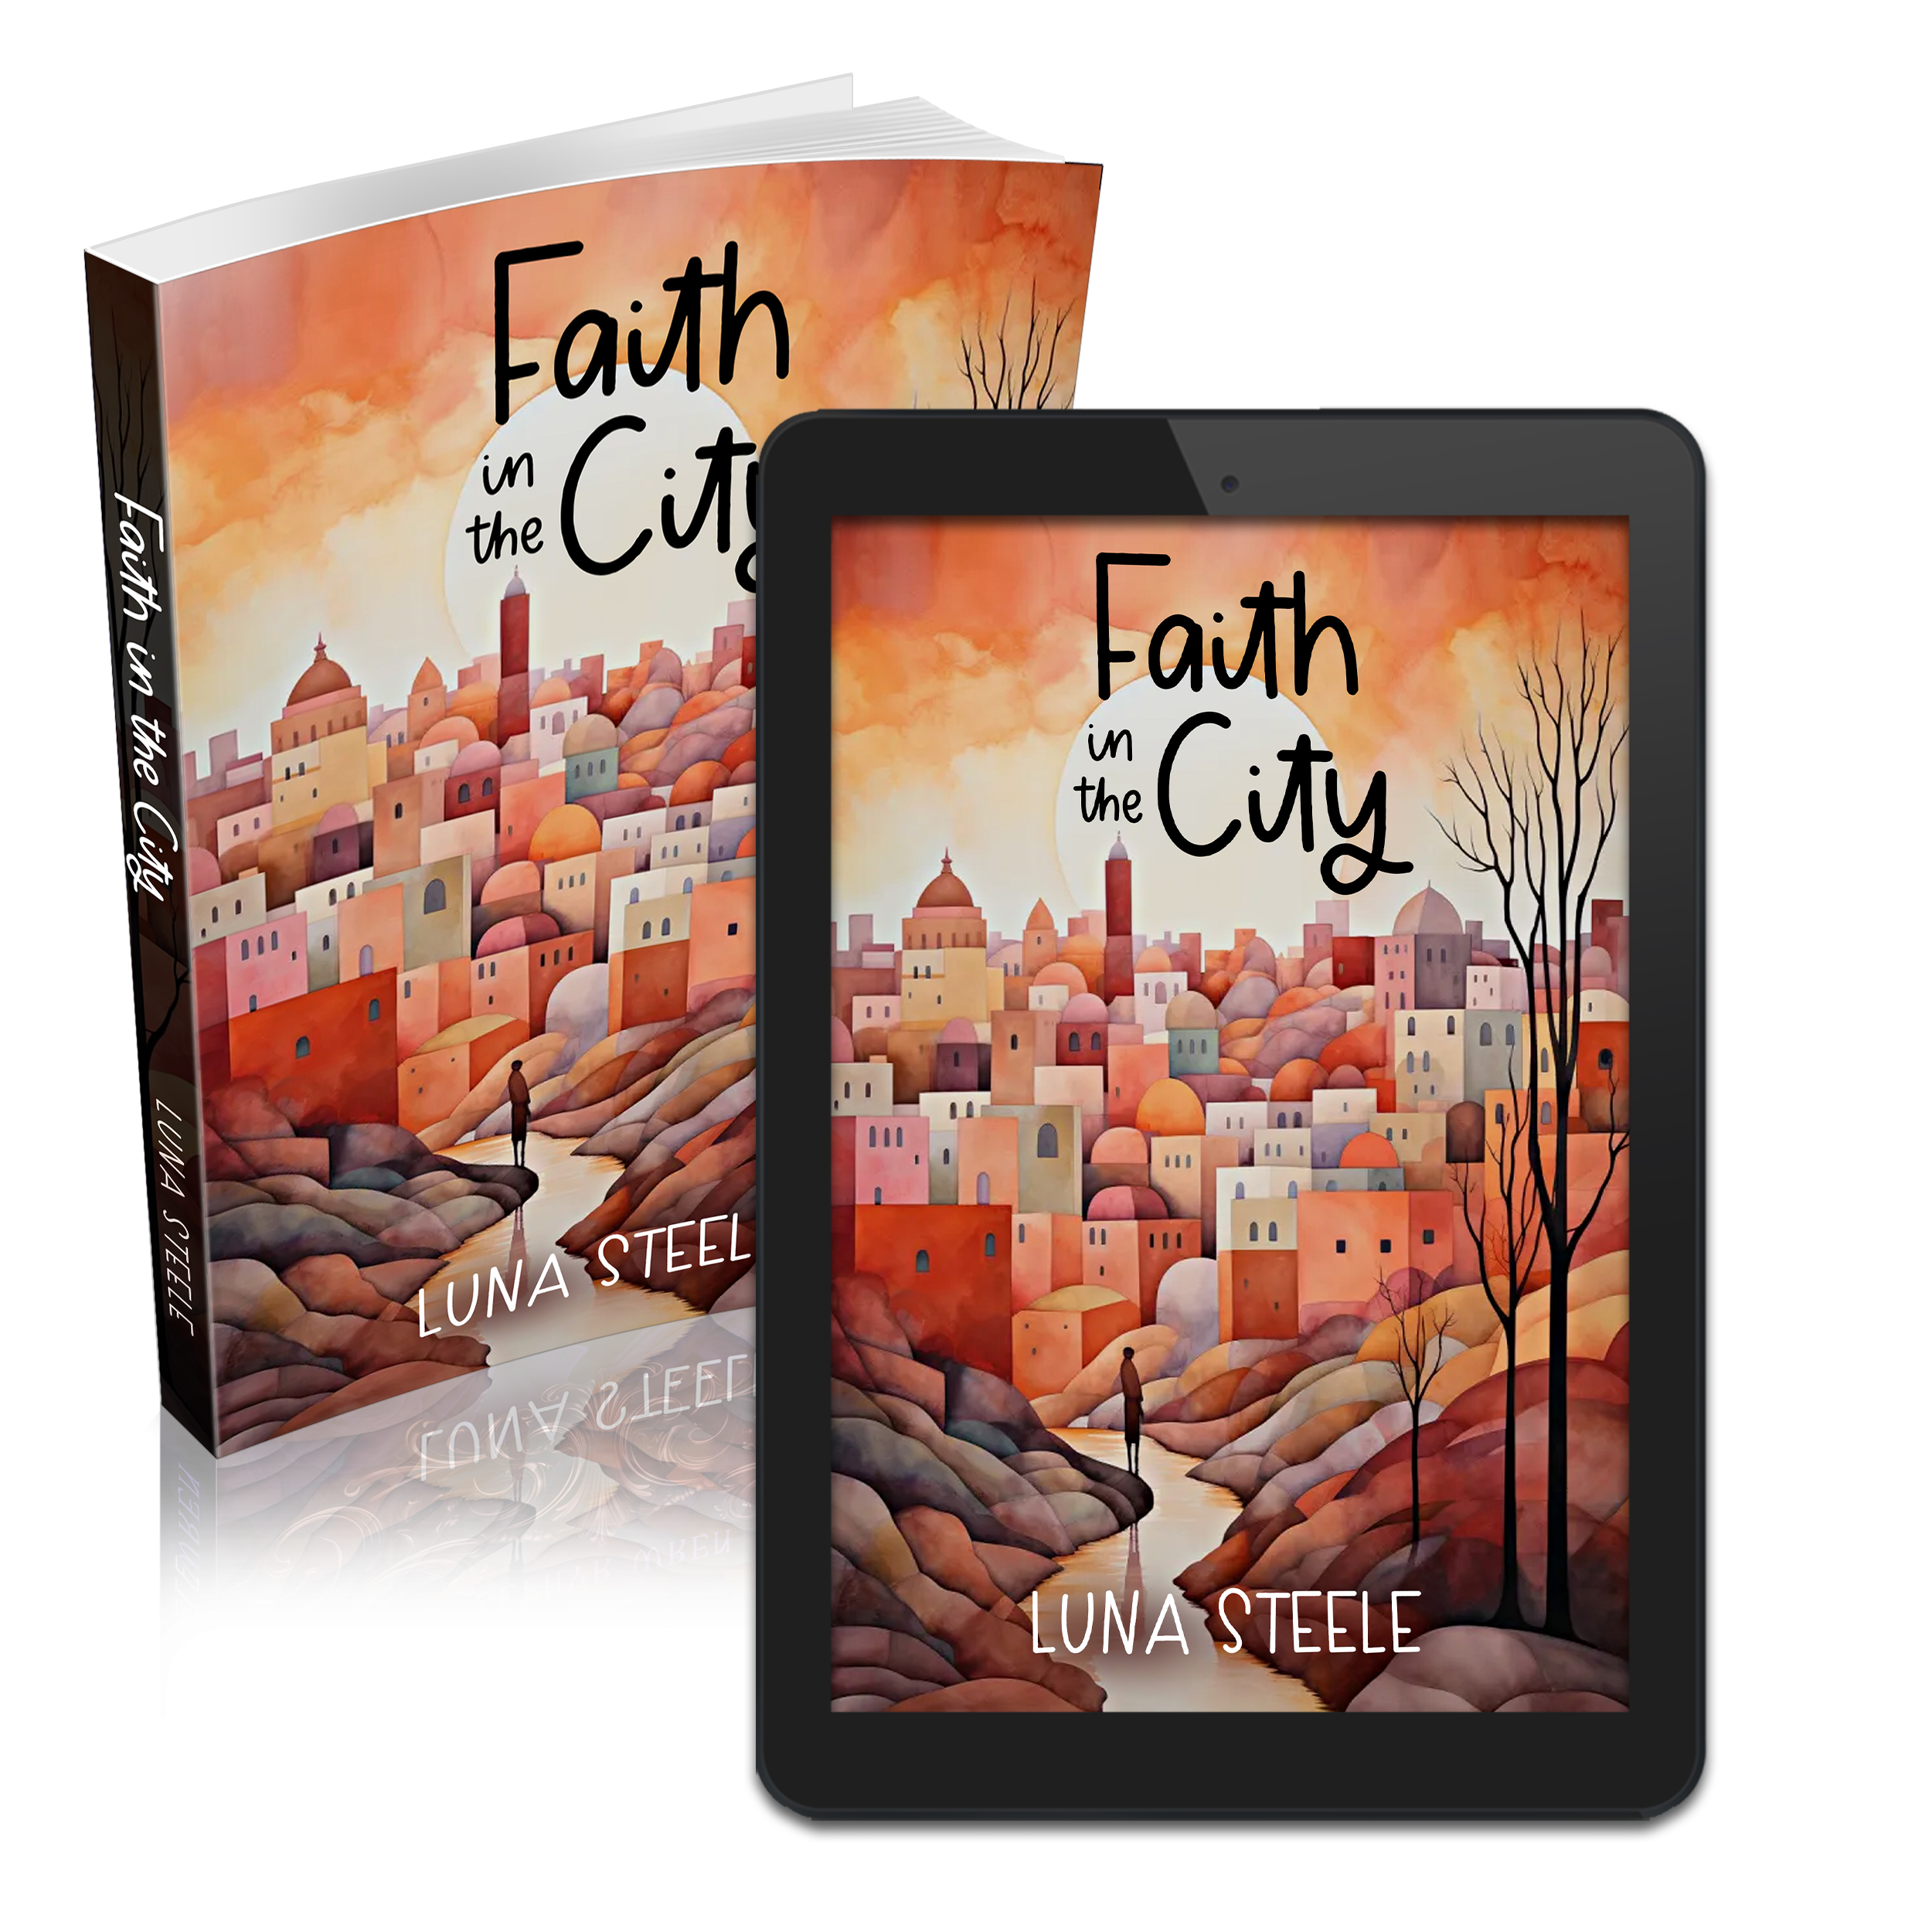 Faith in the city premade cover